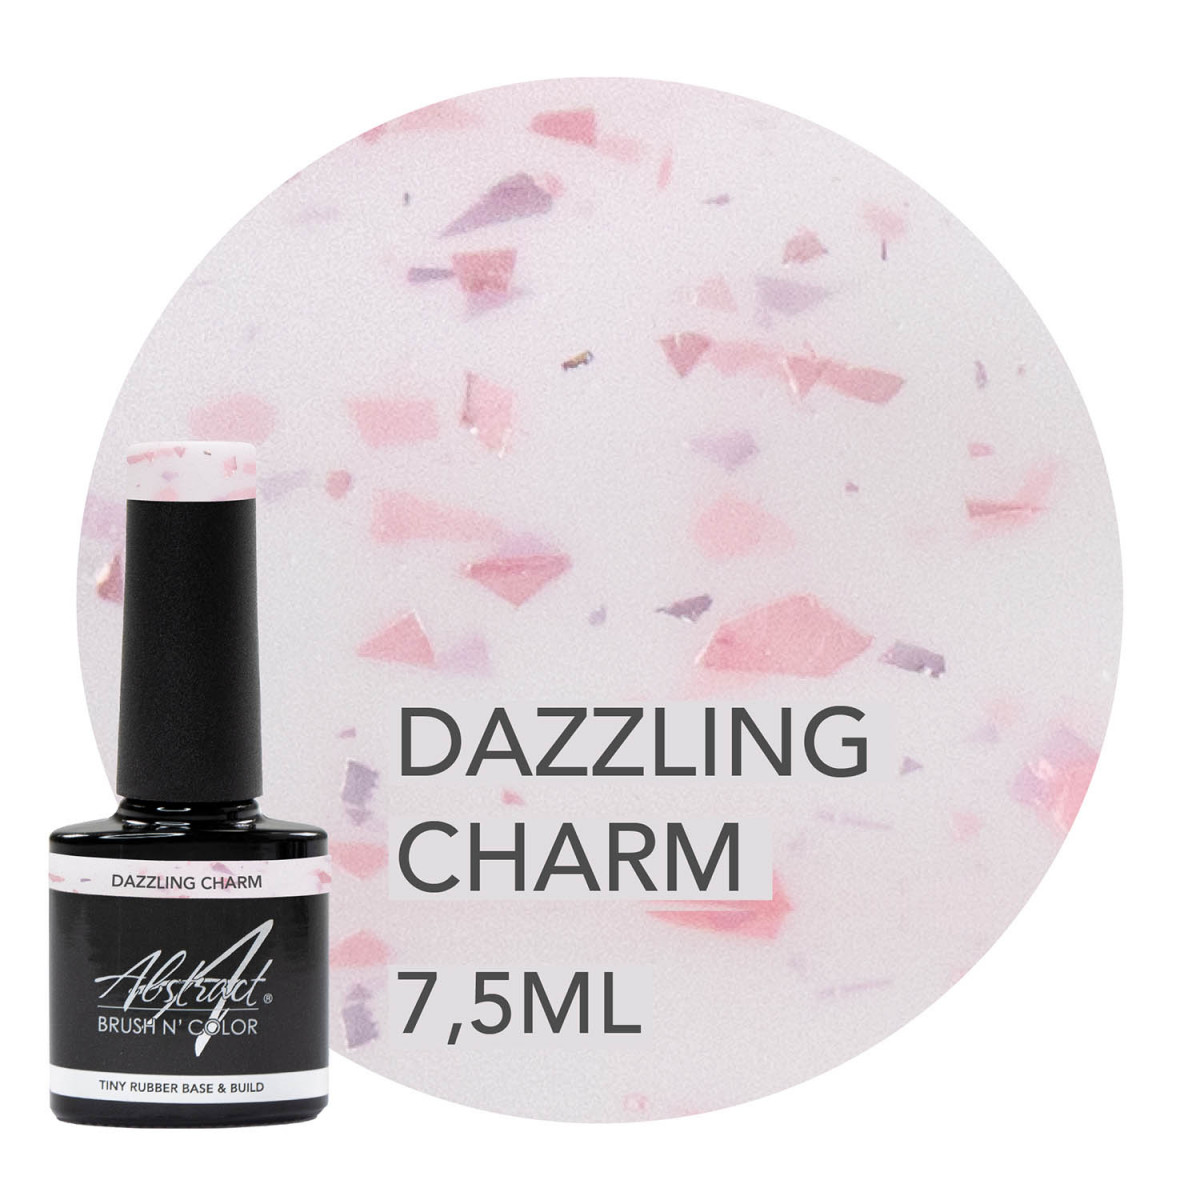 Dazzling Charm Base & Build Gel Abstract